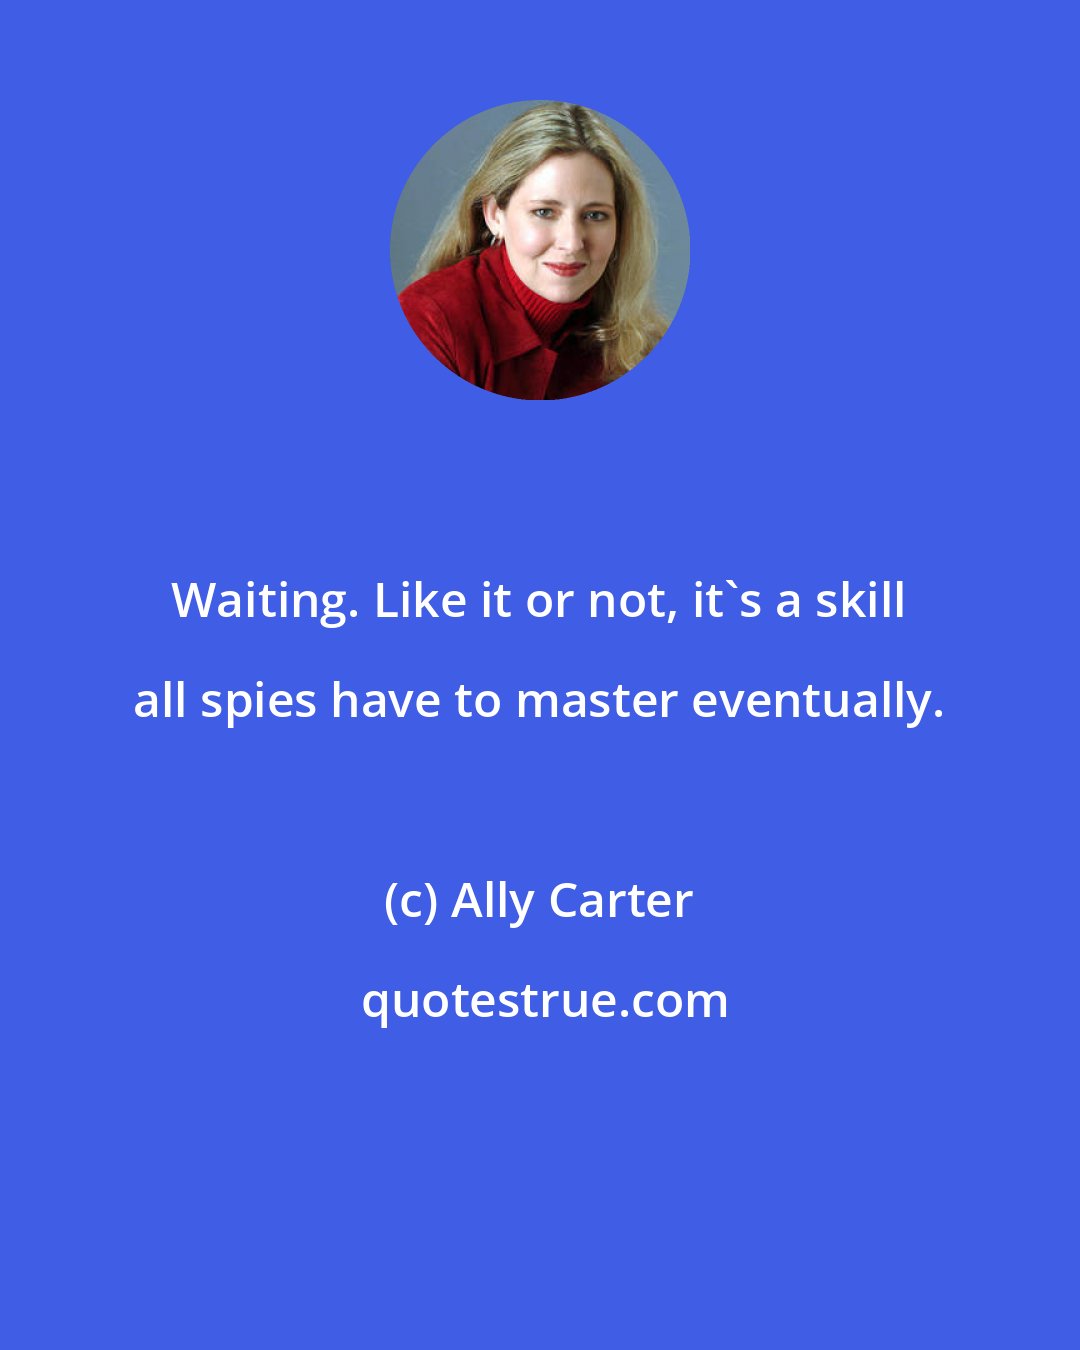 Ally Carter: Waiting. Like it or not, it's a skill all spies have to master eventually.